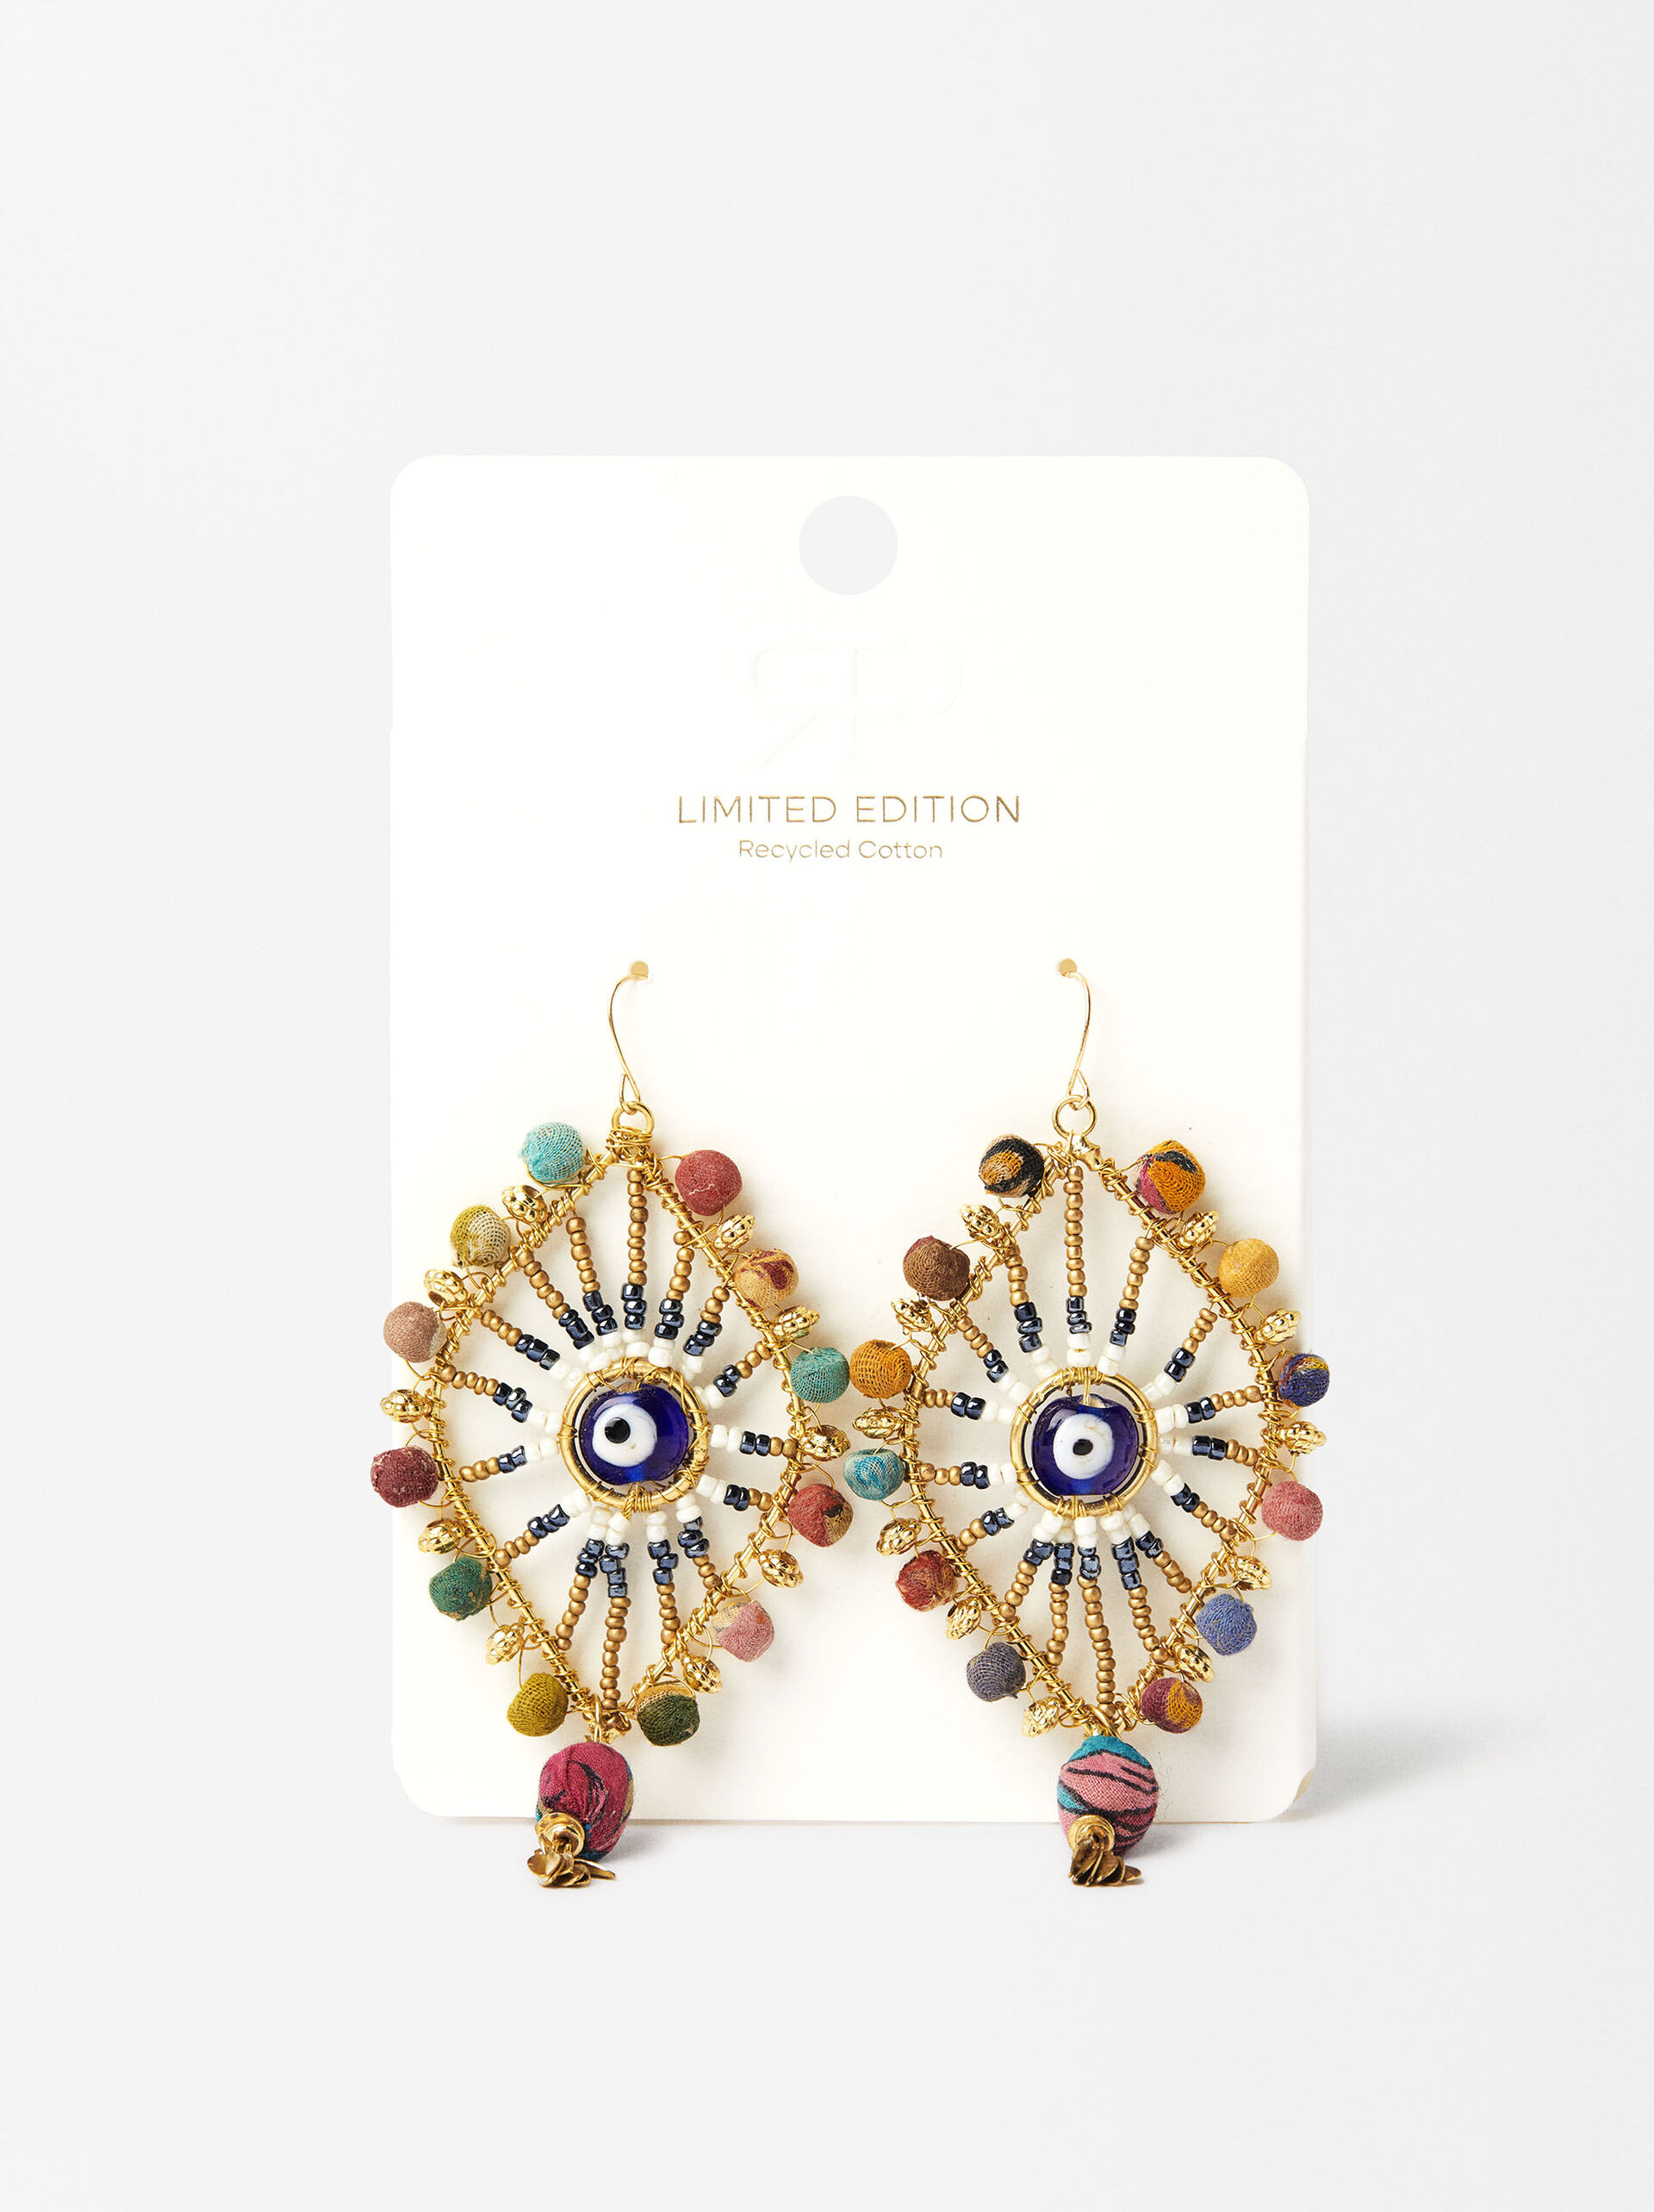 Recycled Cotton Eye Earrings - Limited Edition image number 2.0